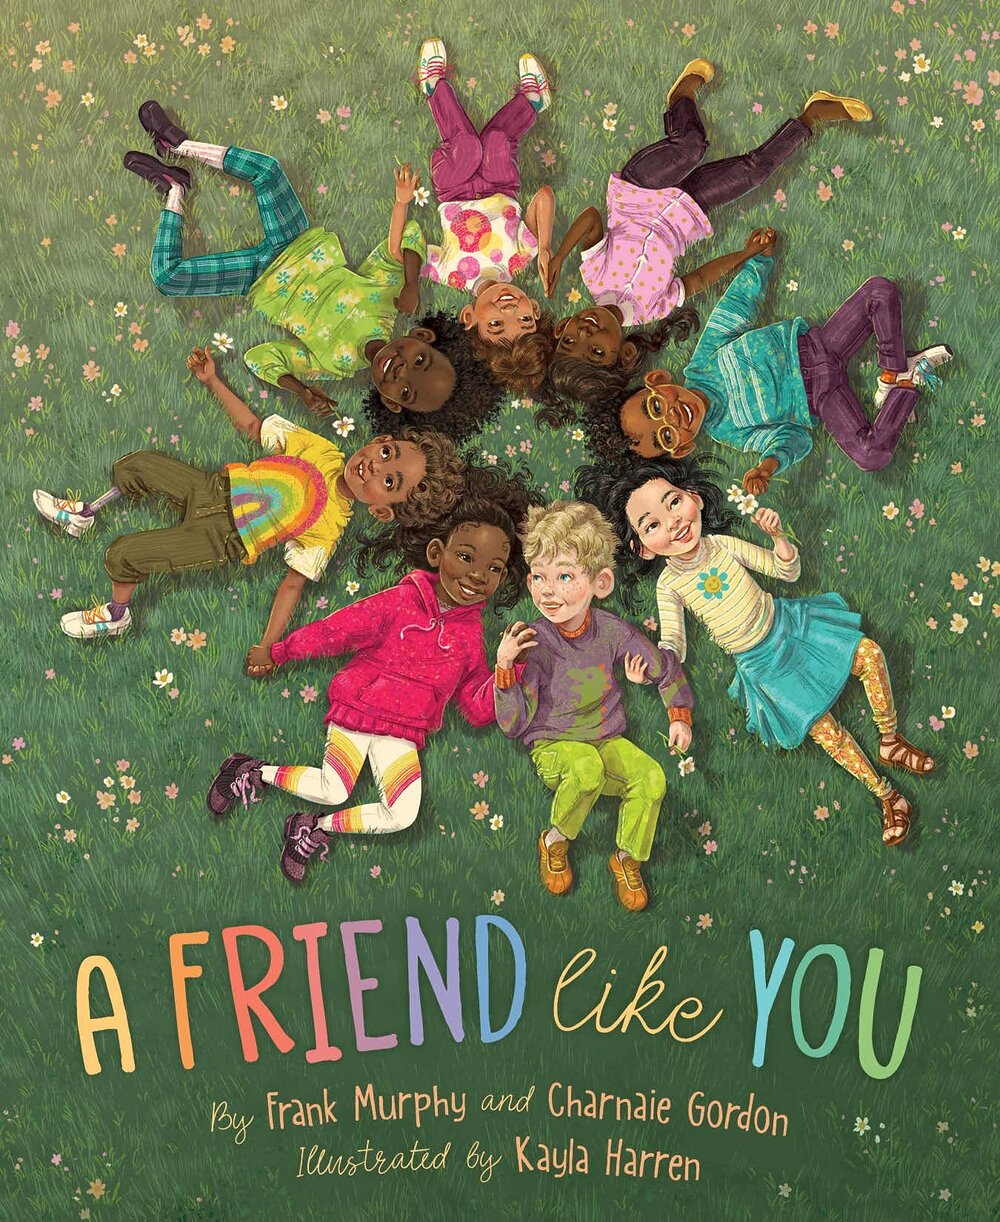 Cover image of the Book "A Friend Like You"